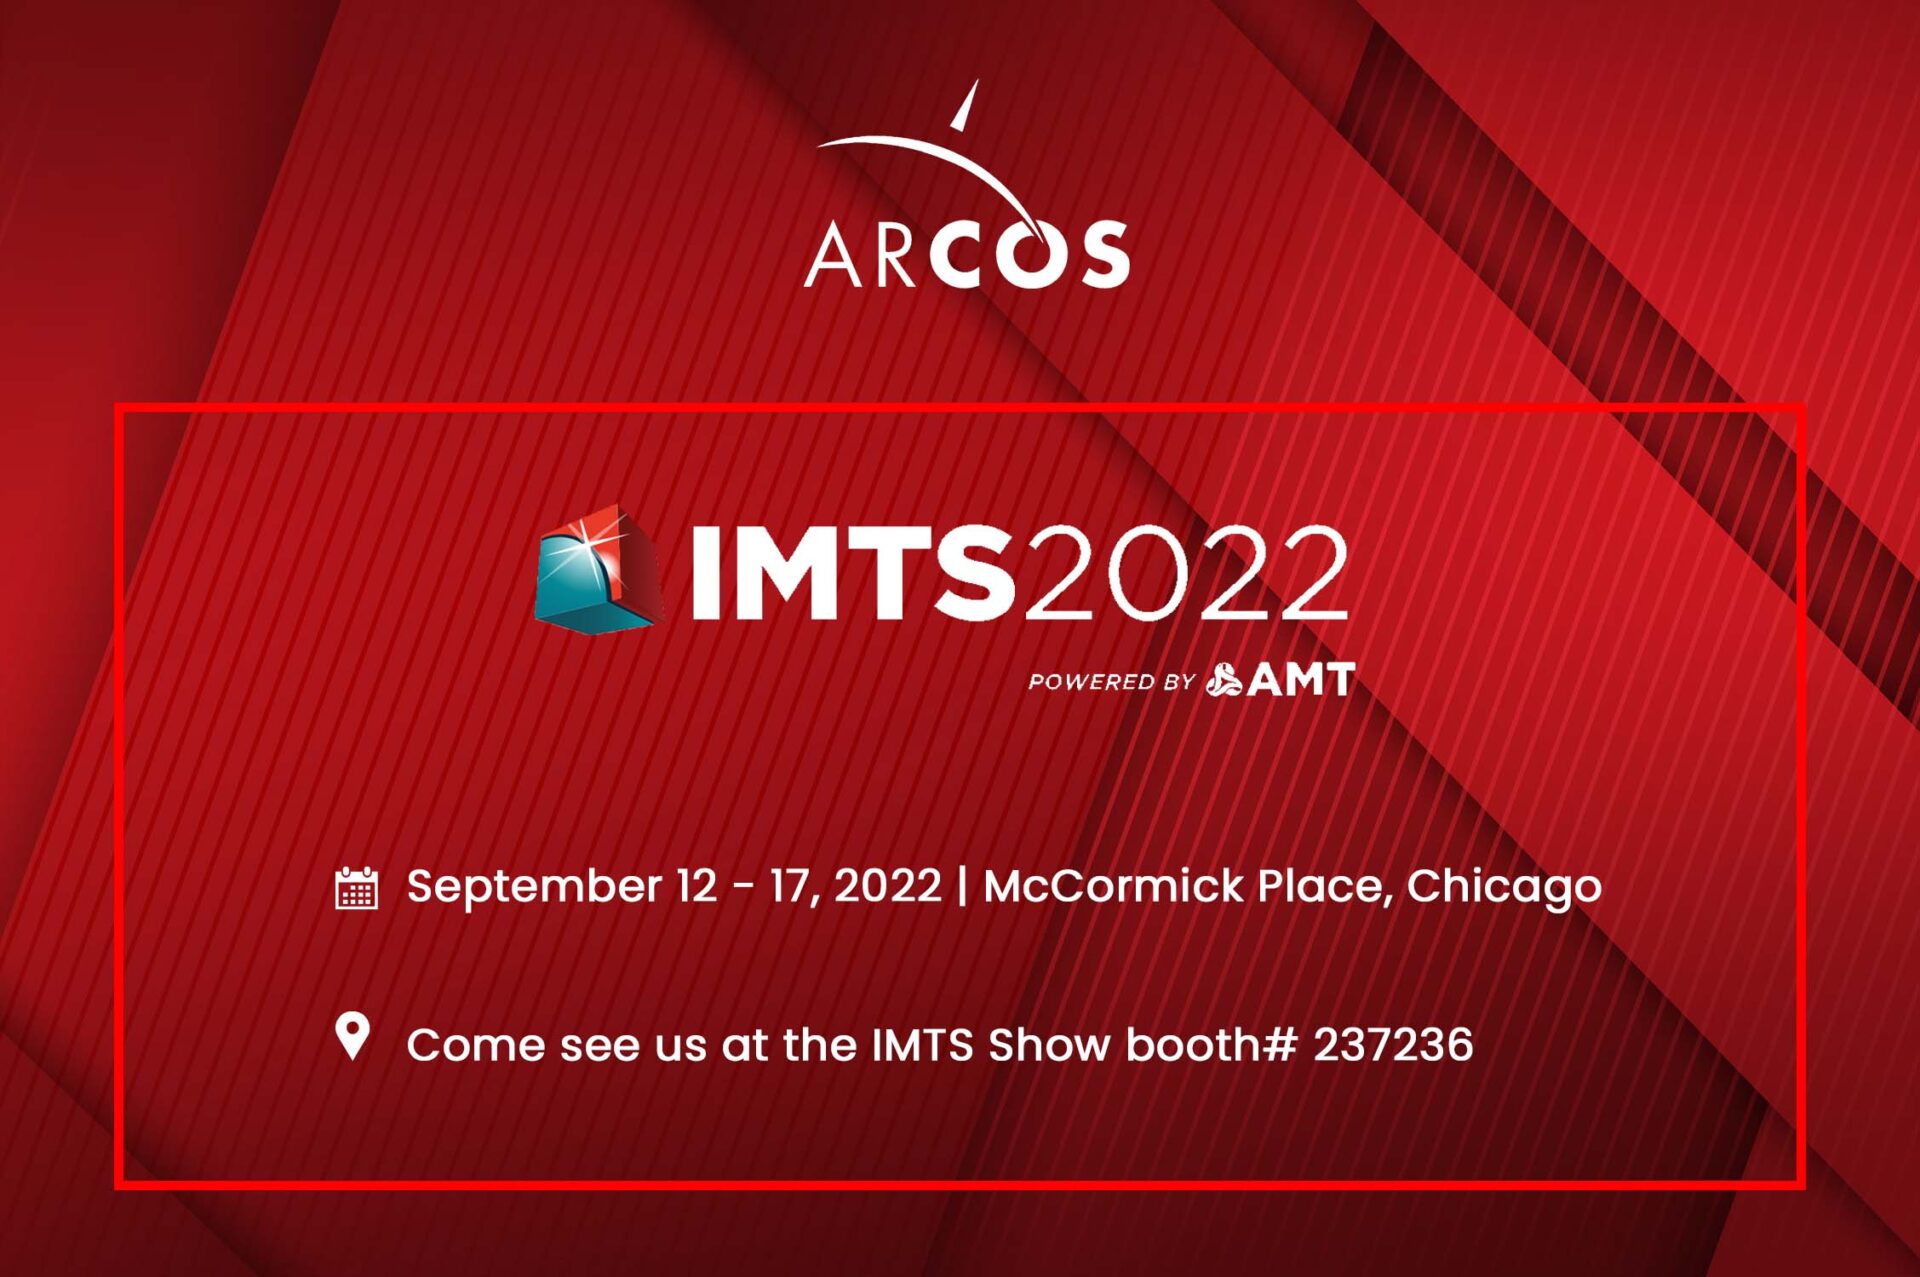 IMTS 2022: all about the International Manufacturing Technology Show